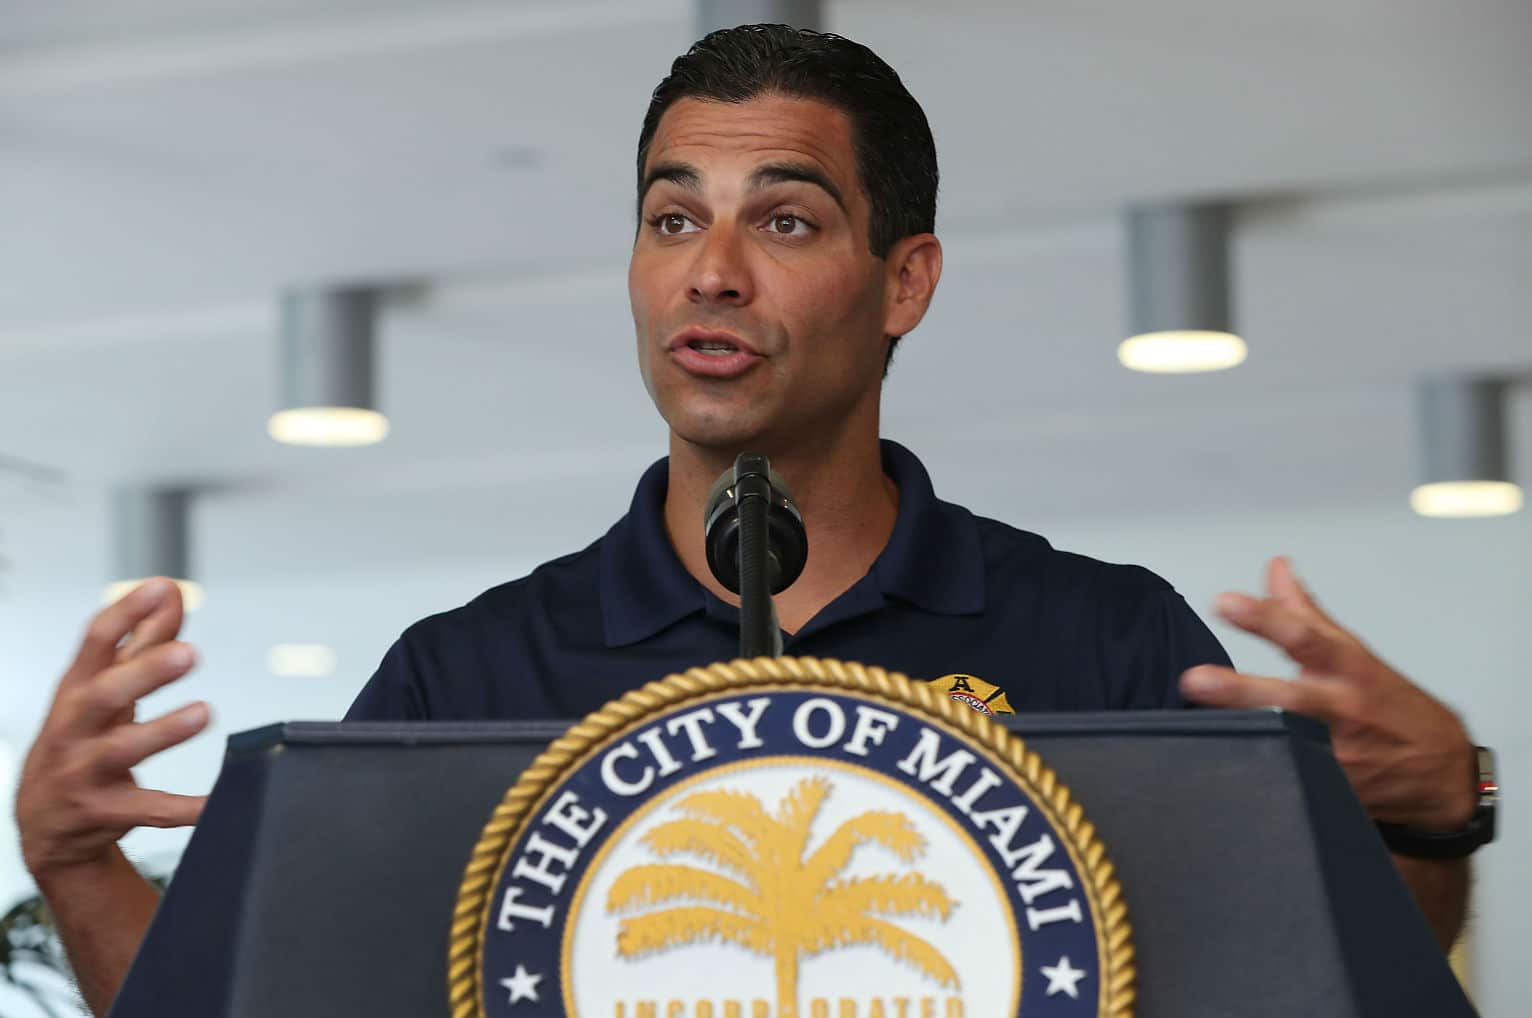 Miami Mayor Plans to Invest in Bitcoin